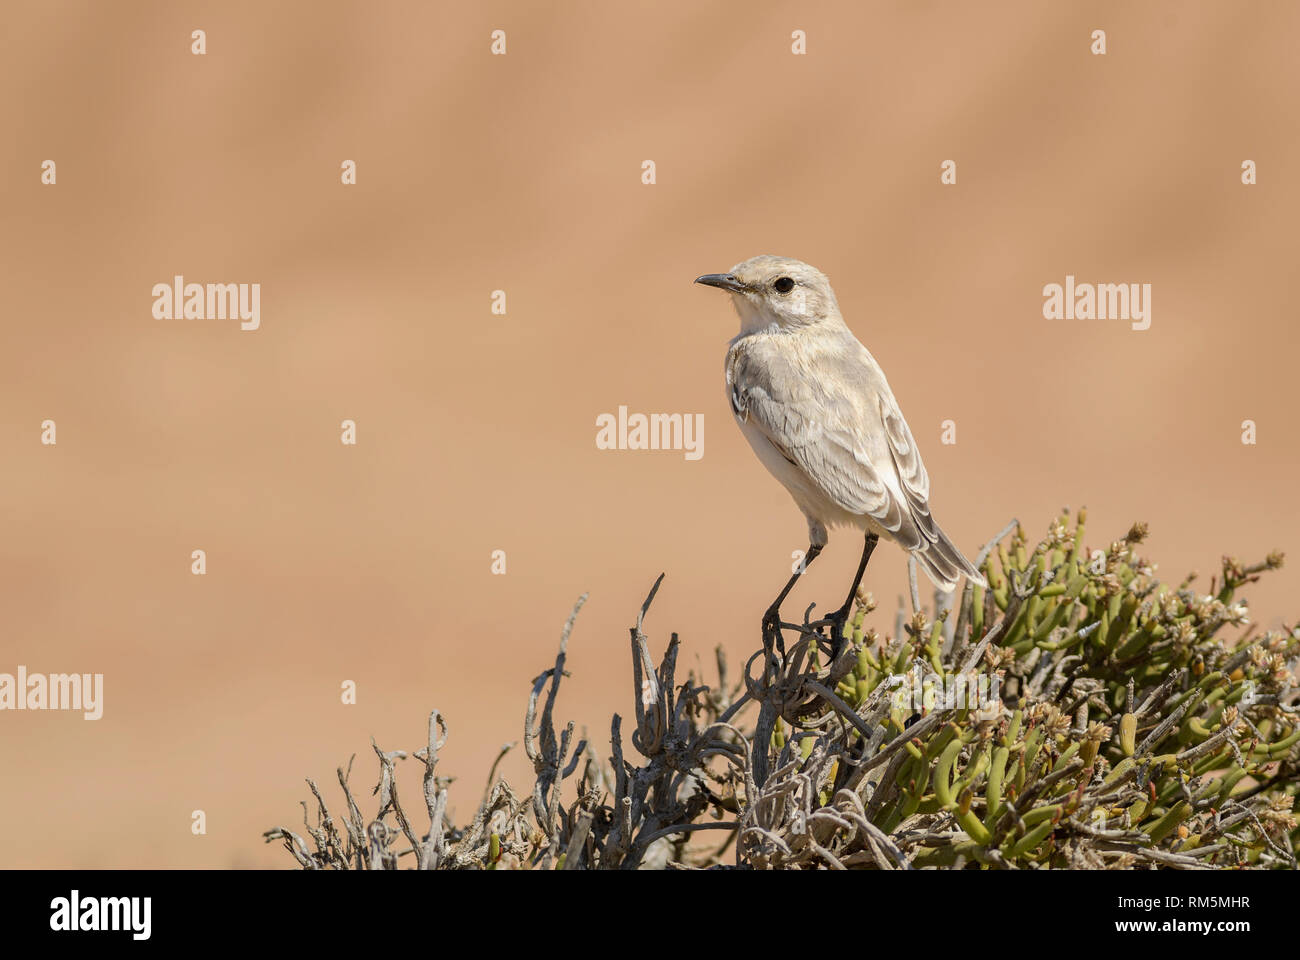 Tractrac Chat - Cercomela tractrac, beautiful perching bird from southern Africa, Namib desert, Walvis Bay, Namibia. Stock Photo